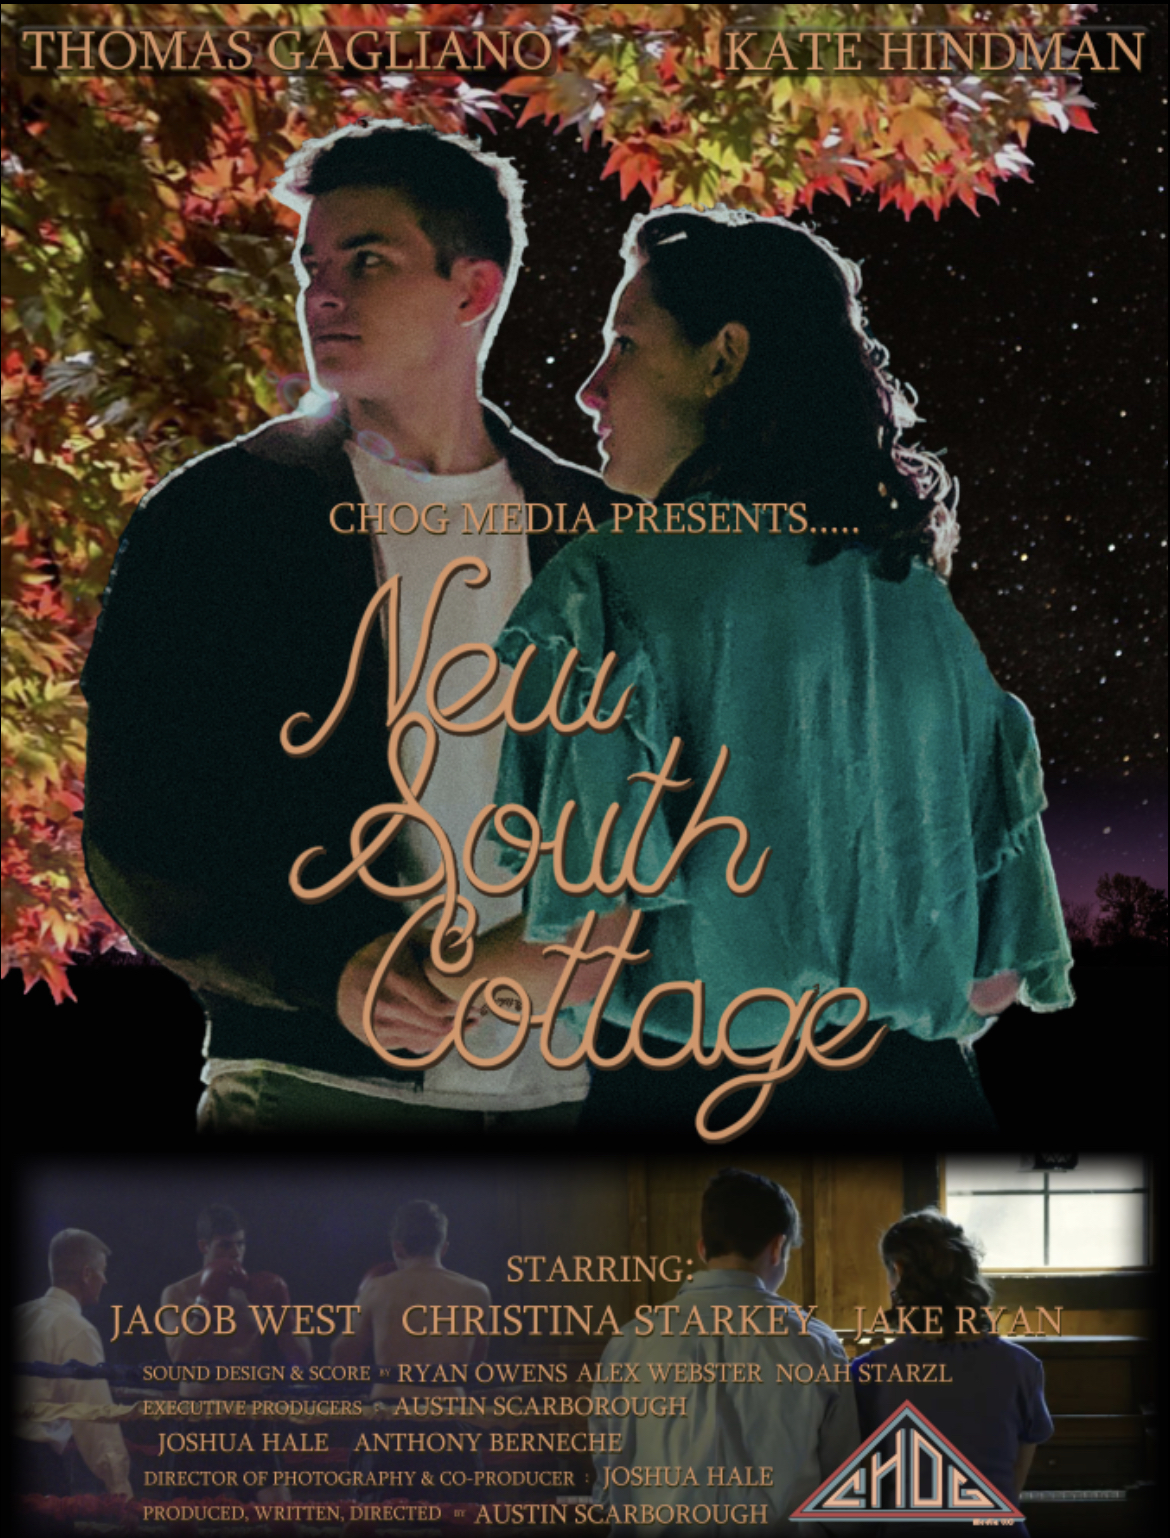 Trussville-based film company releases ‘New South Cottage’ movie on DVD, Amazon Prime